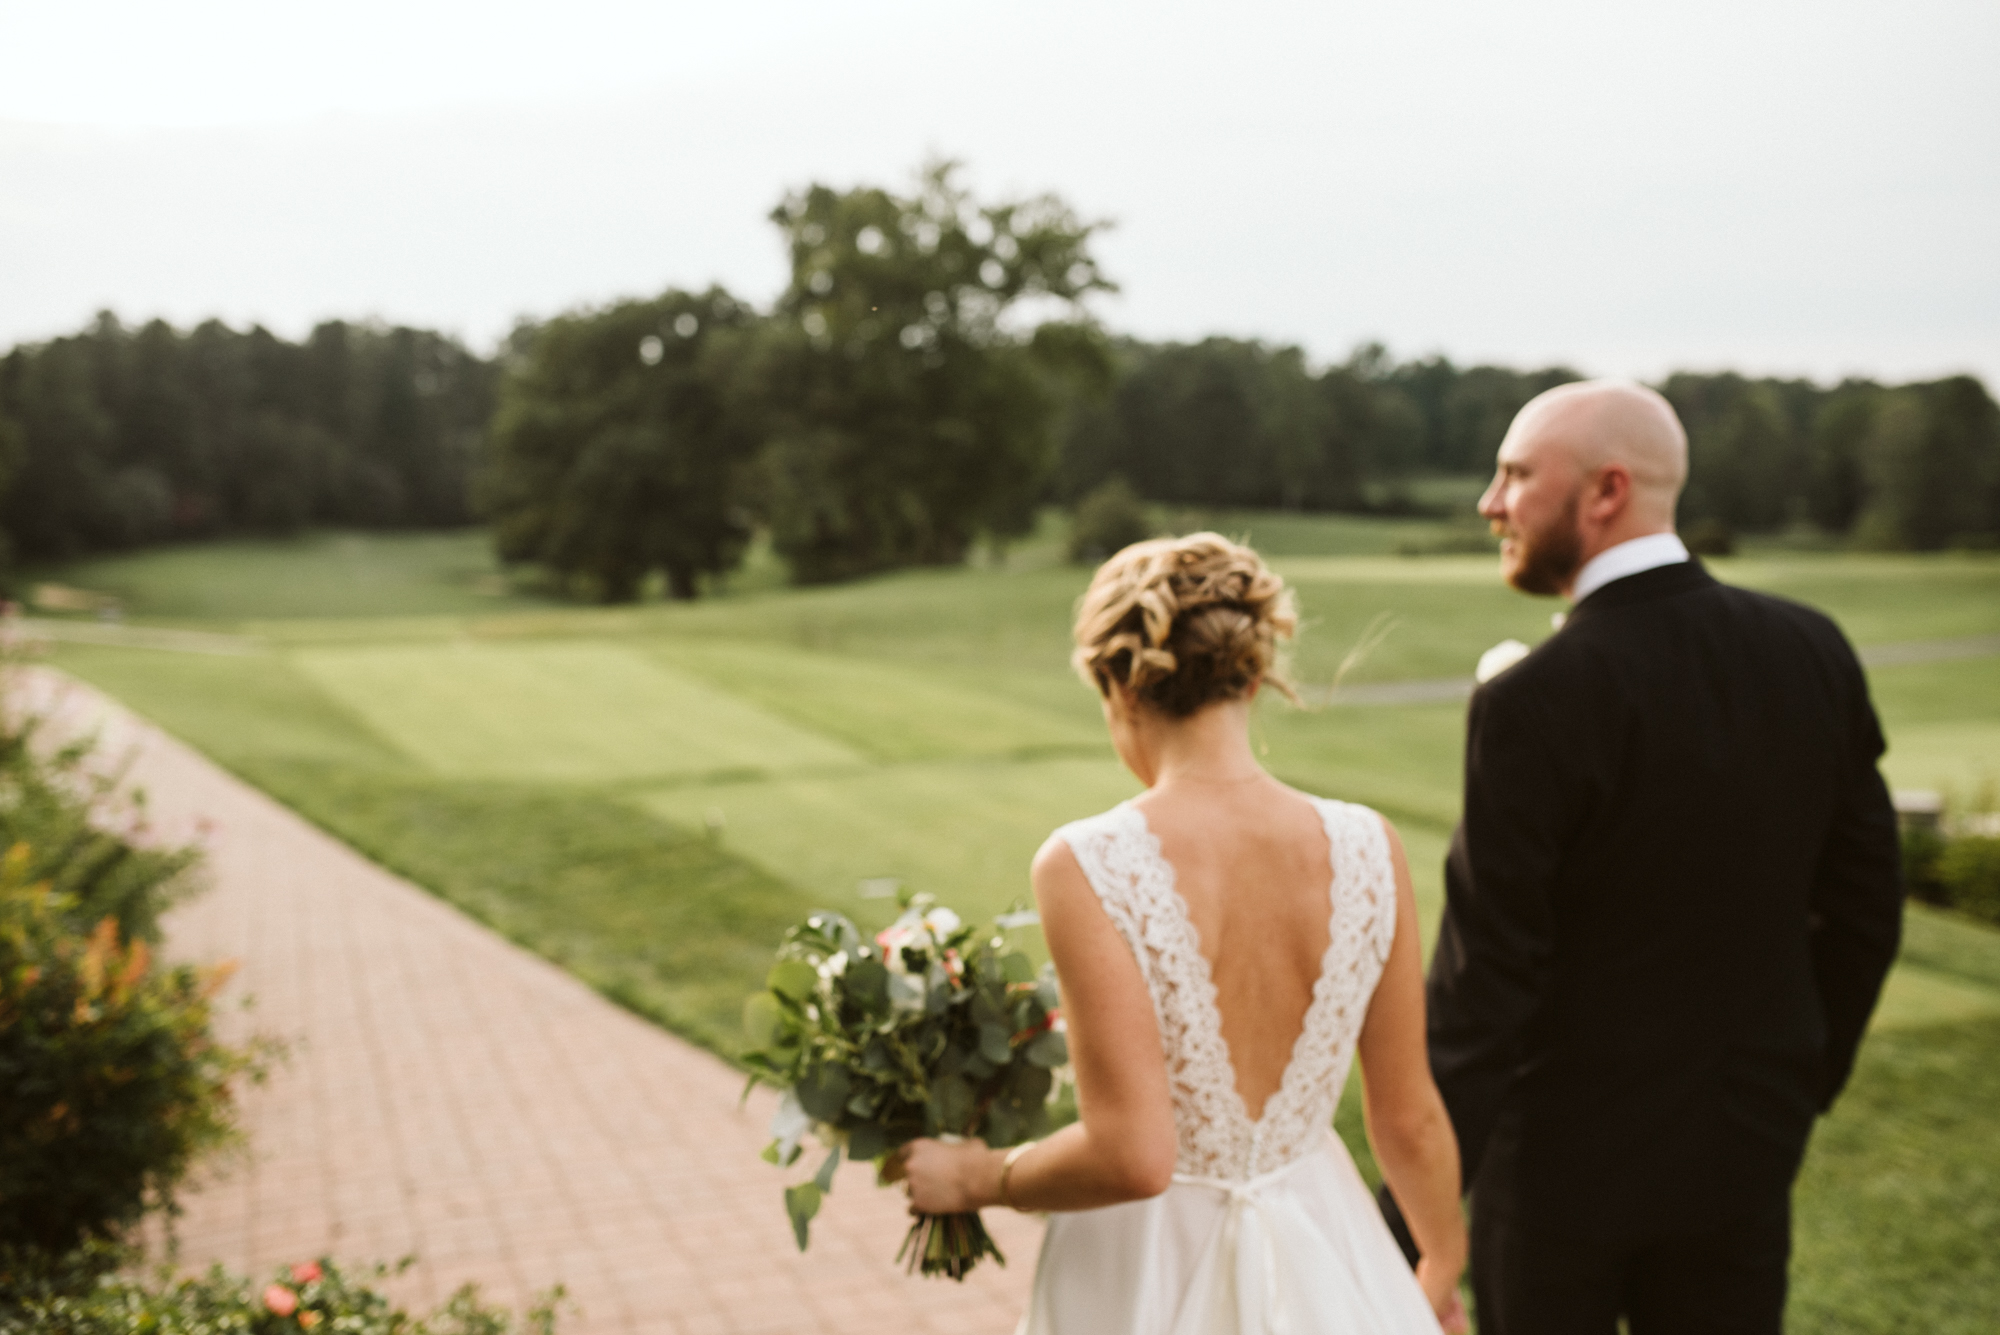 Elegant, Columbia Country Club, Chevy Chase Maryland, Baltimore Wedding Photographer, Classic, Traditional, Bridge and Groom Walking Holding Hands, BHLDN Dress, Lace Wedding Dress, Sweet Hairafter